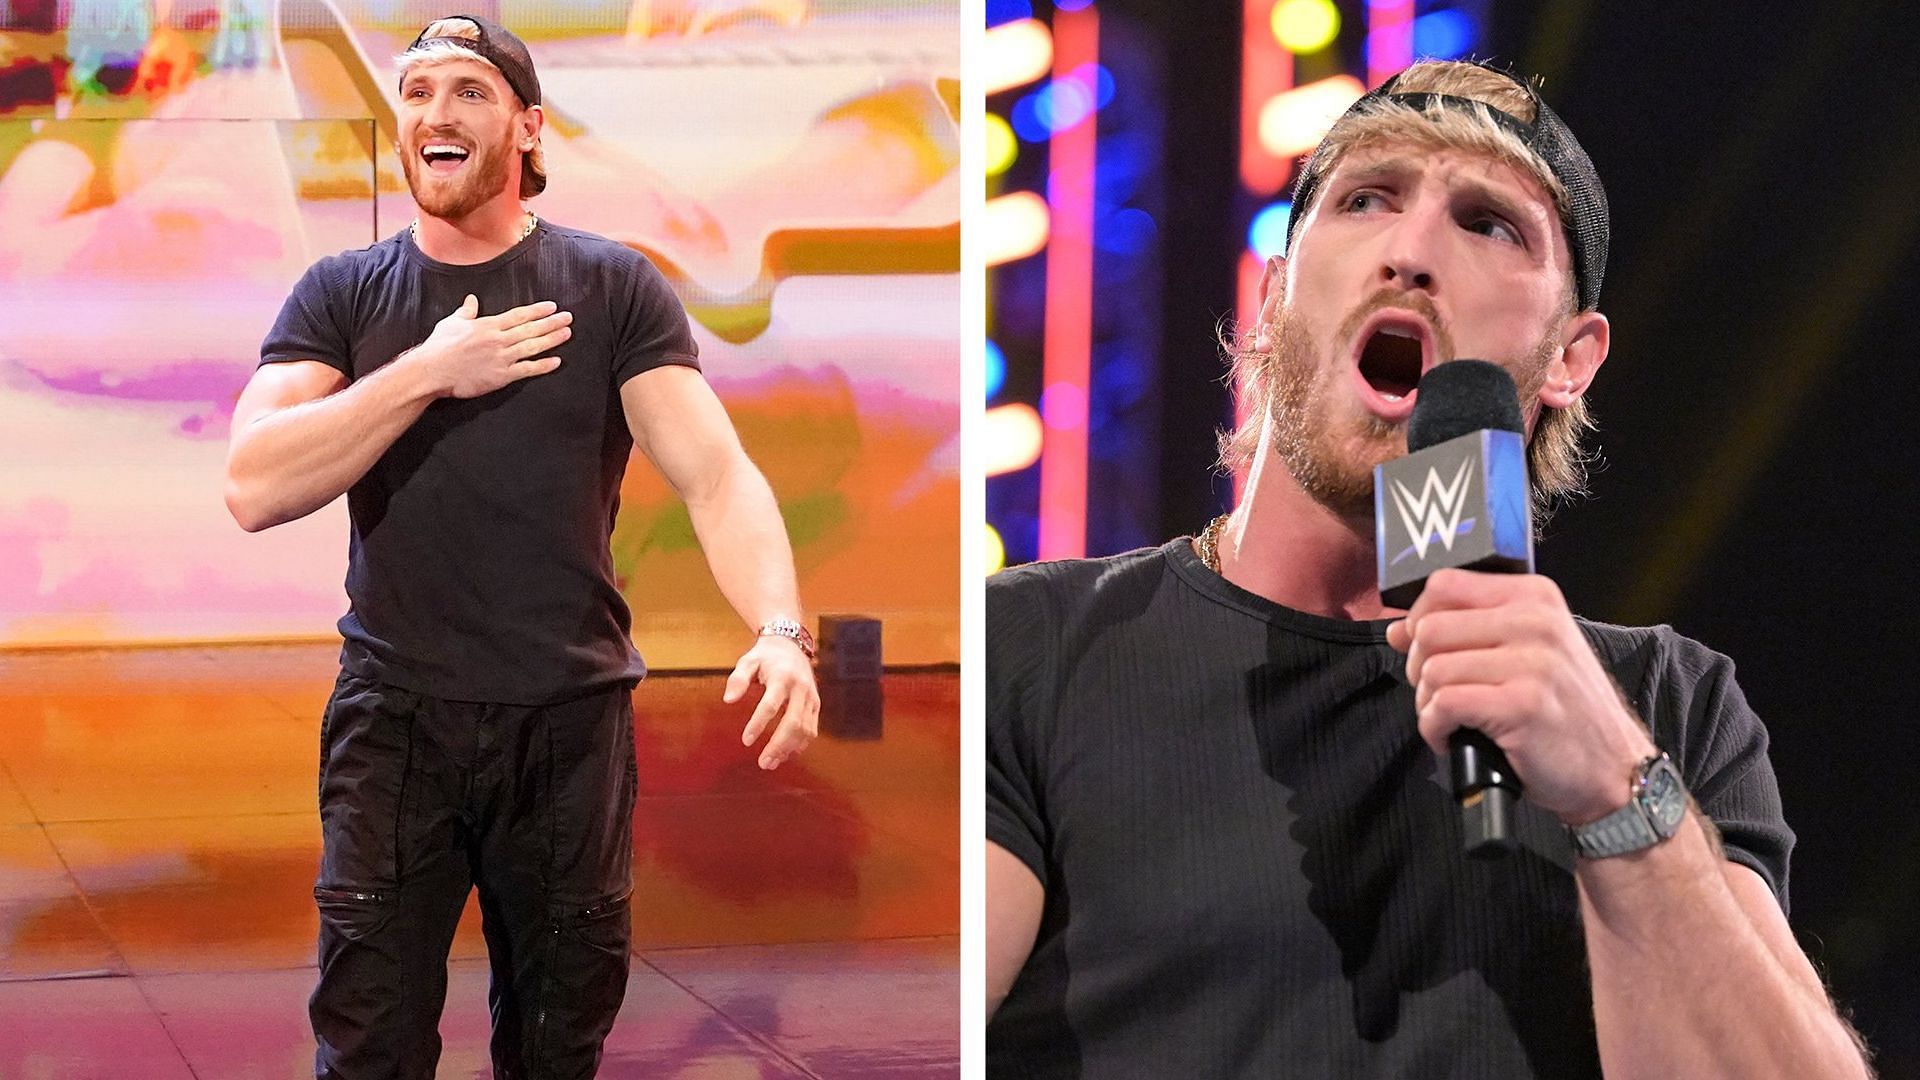 Logan Paul will appear on WWE Friday Night SmackDown